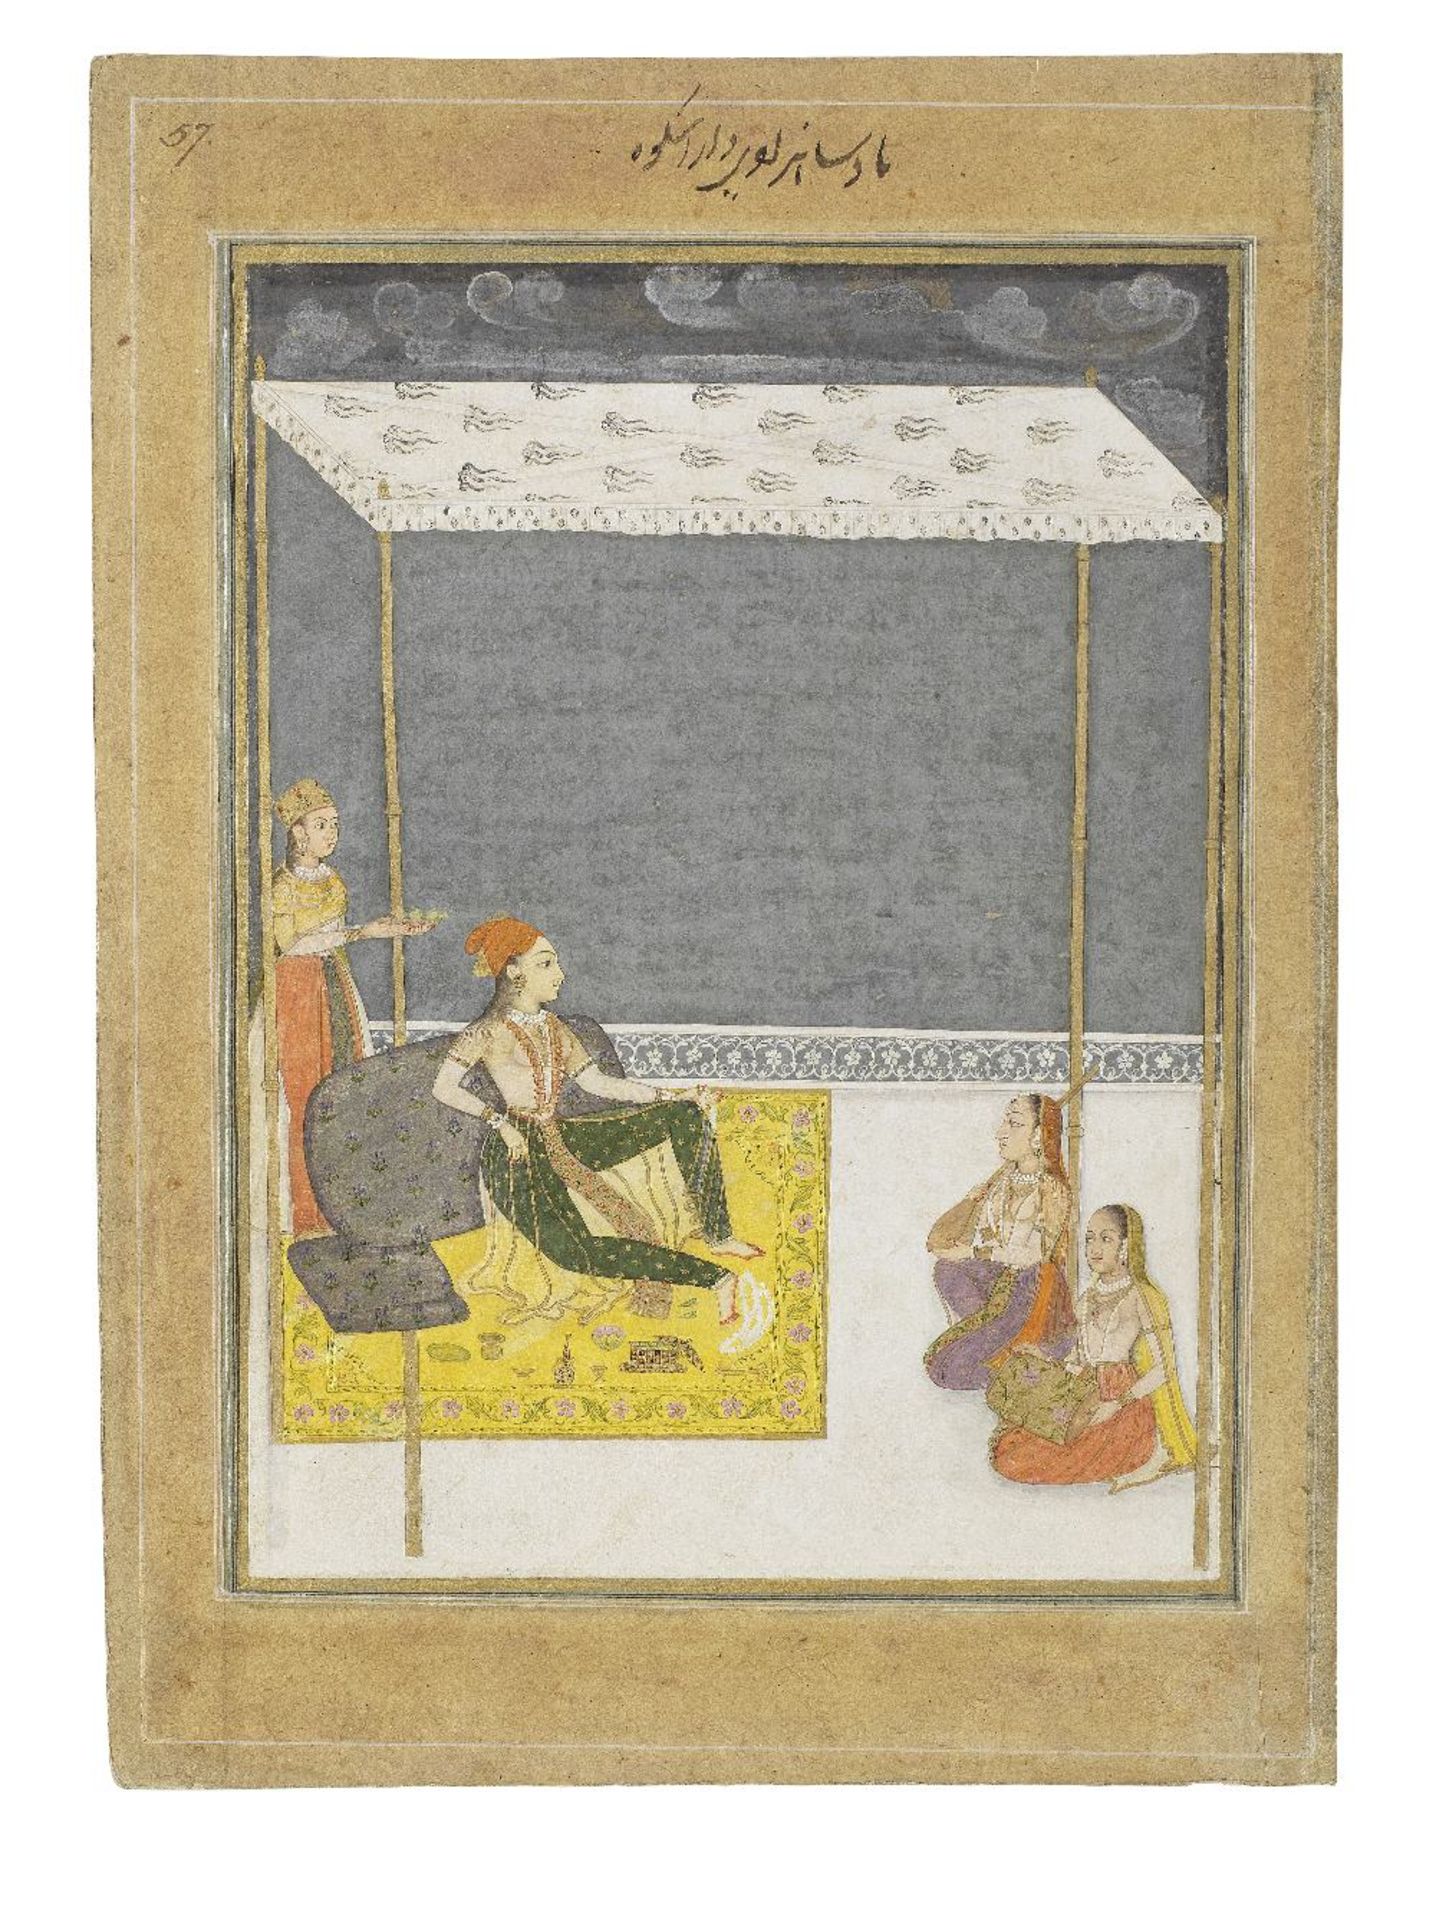 A noblewoman seated on a terrace listening to music Mughal, circa 1730-40